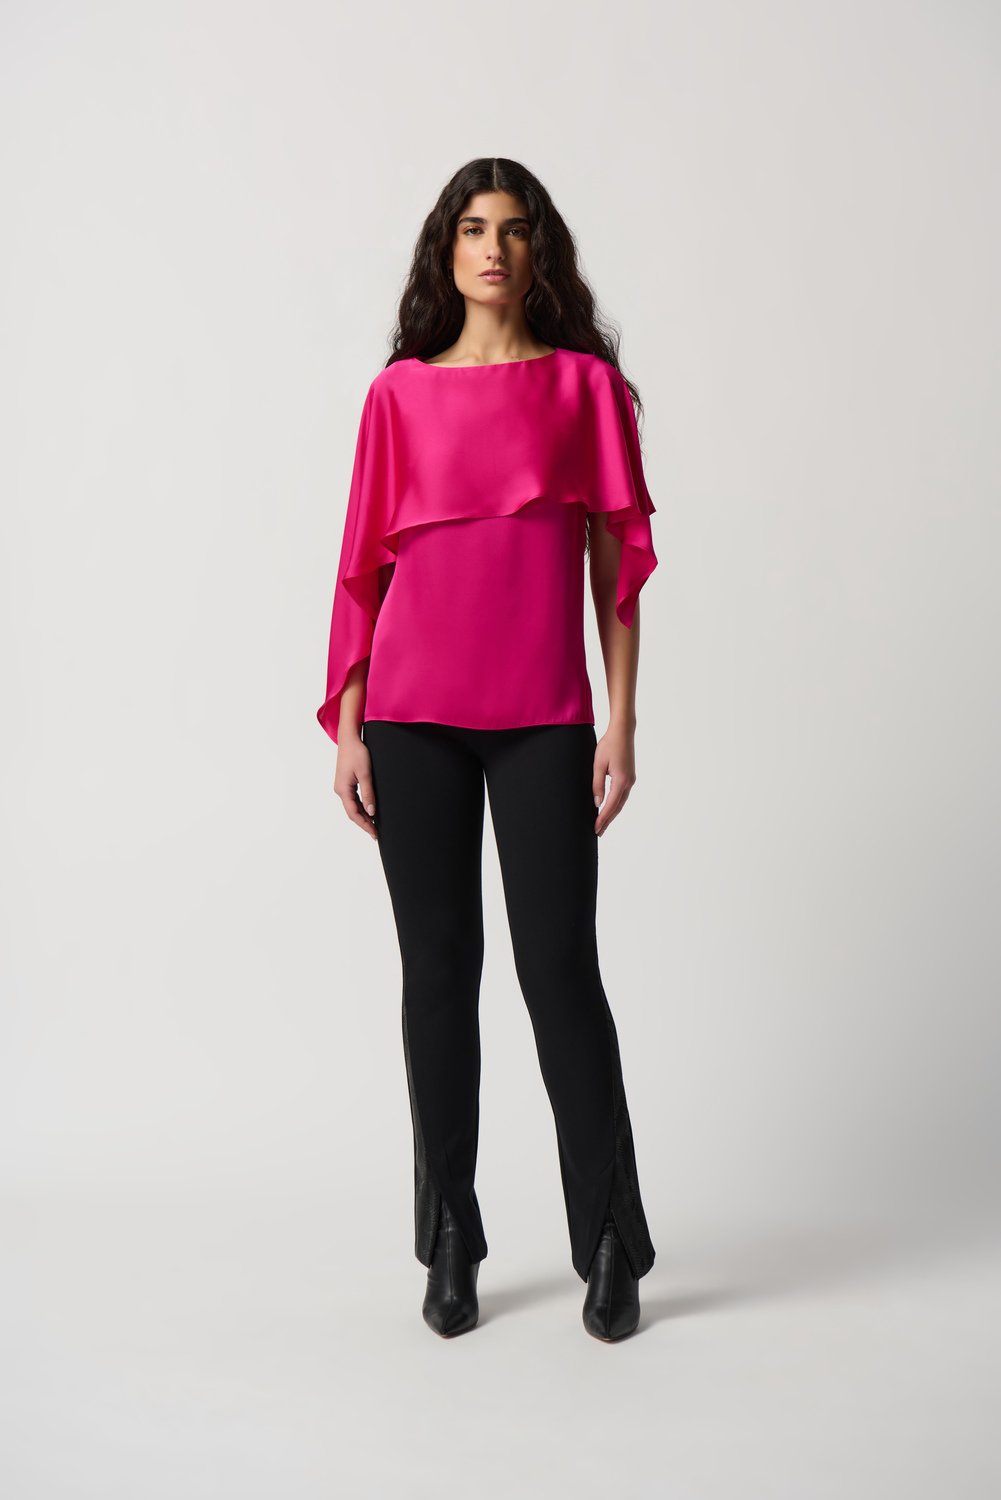 Silky Layered Top Style 234023. Shocking Pink